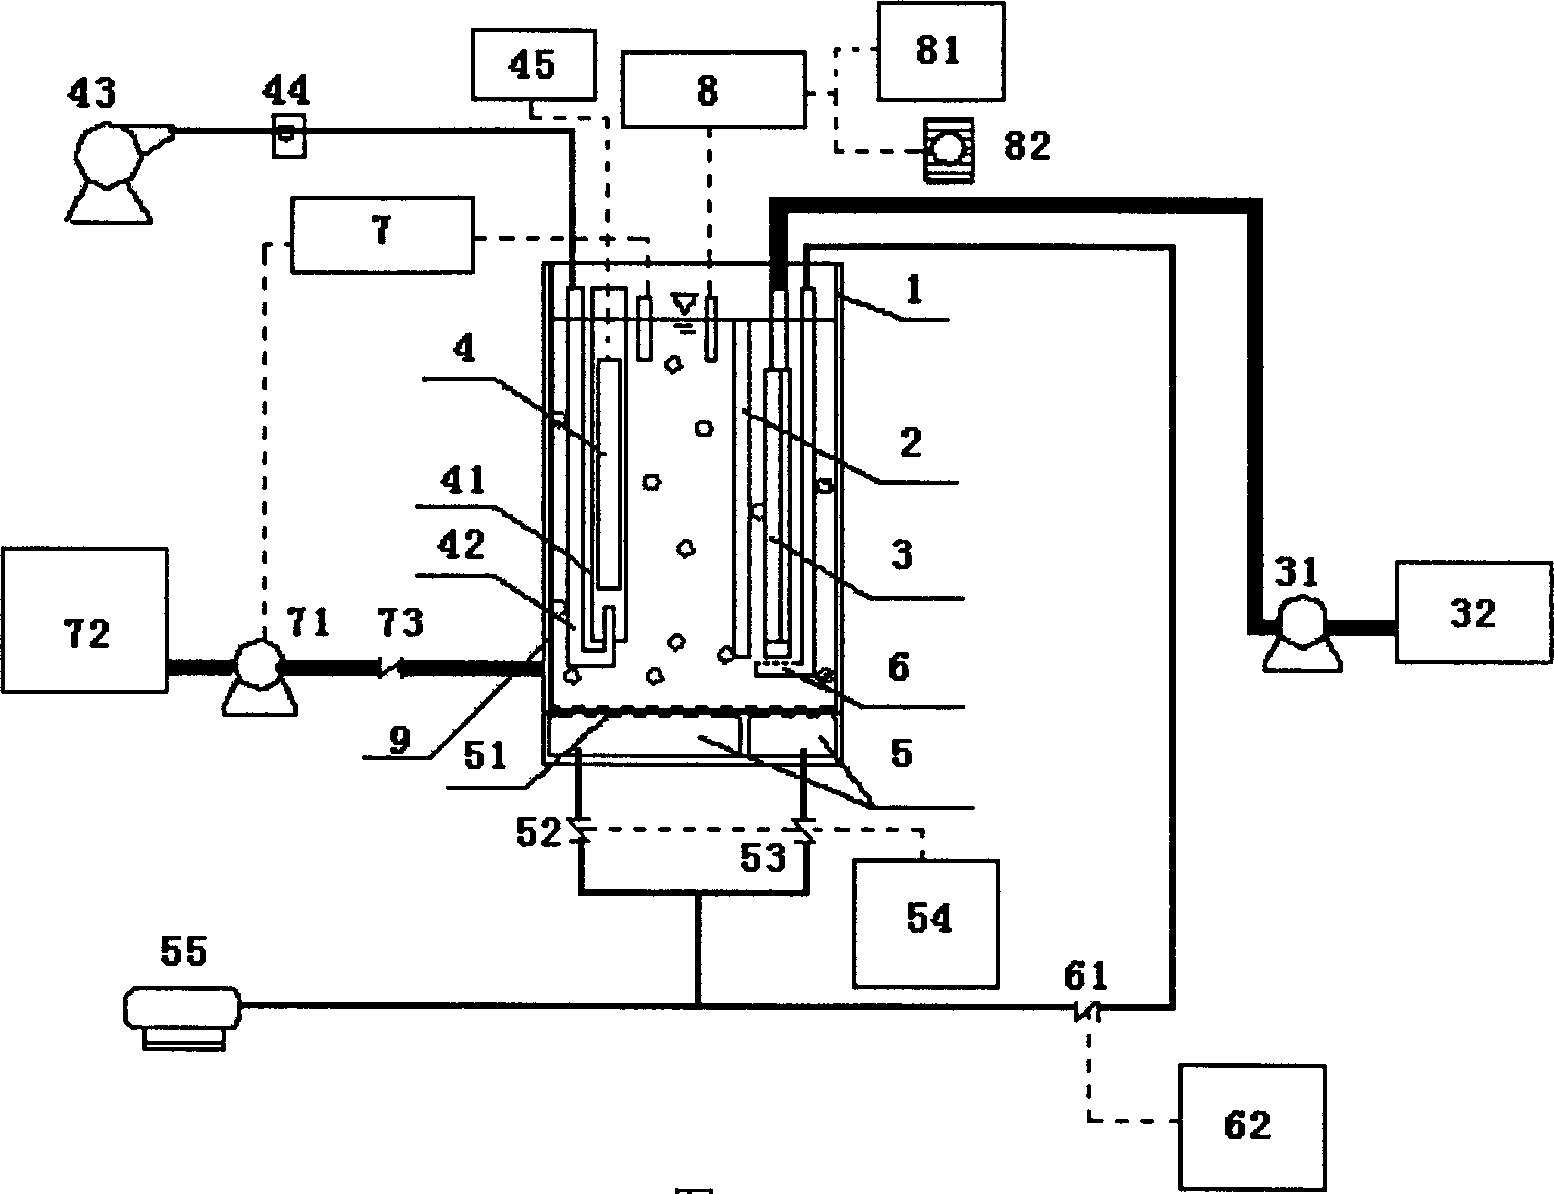 Fluidzed equipment for treating with water by using photocatalysis and oxidation